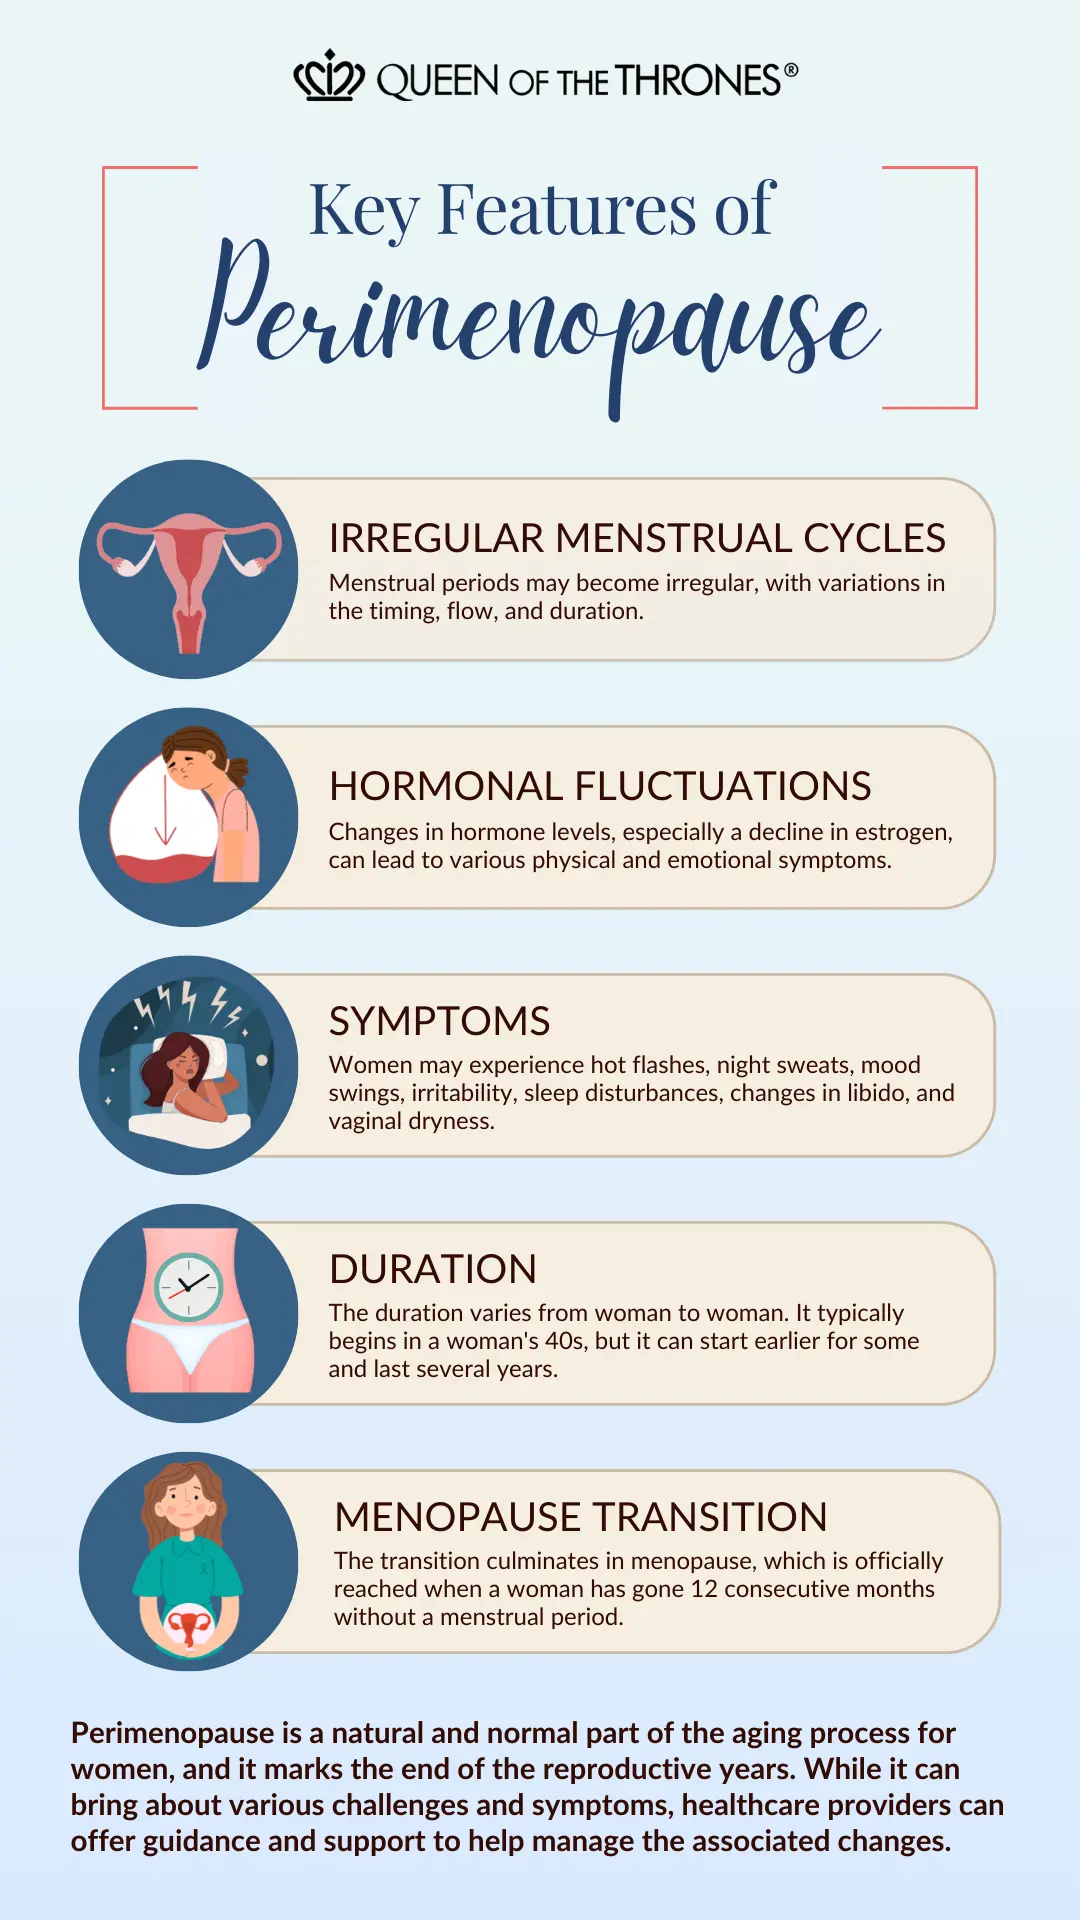 Key features of perimenopause by Queen of the Thrones